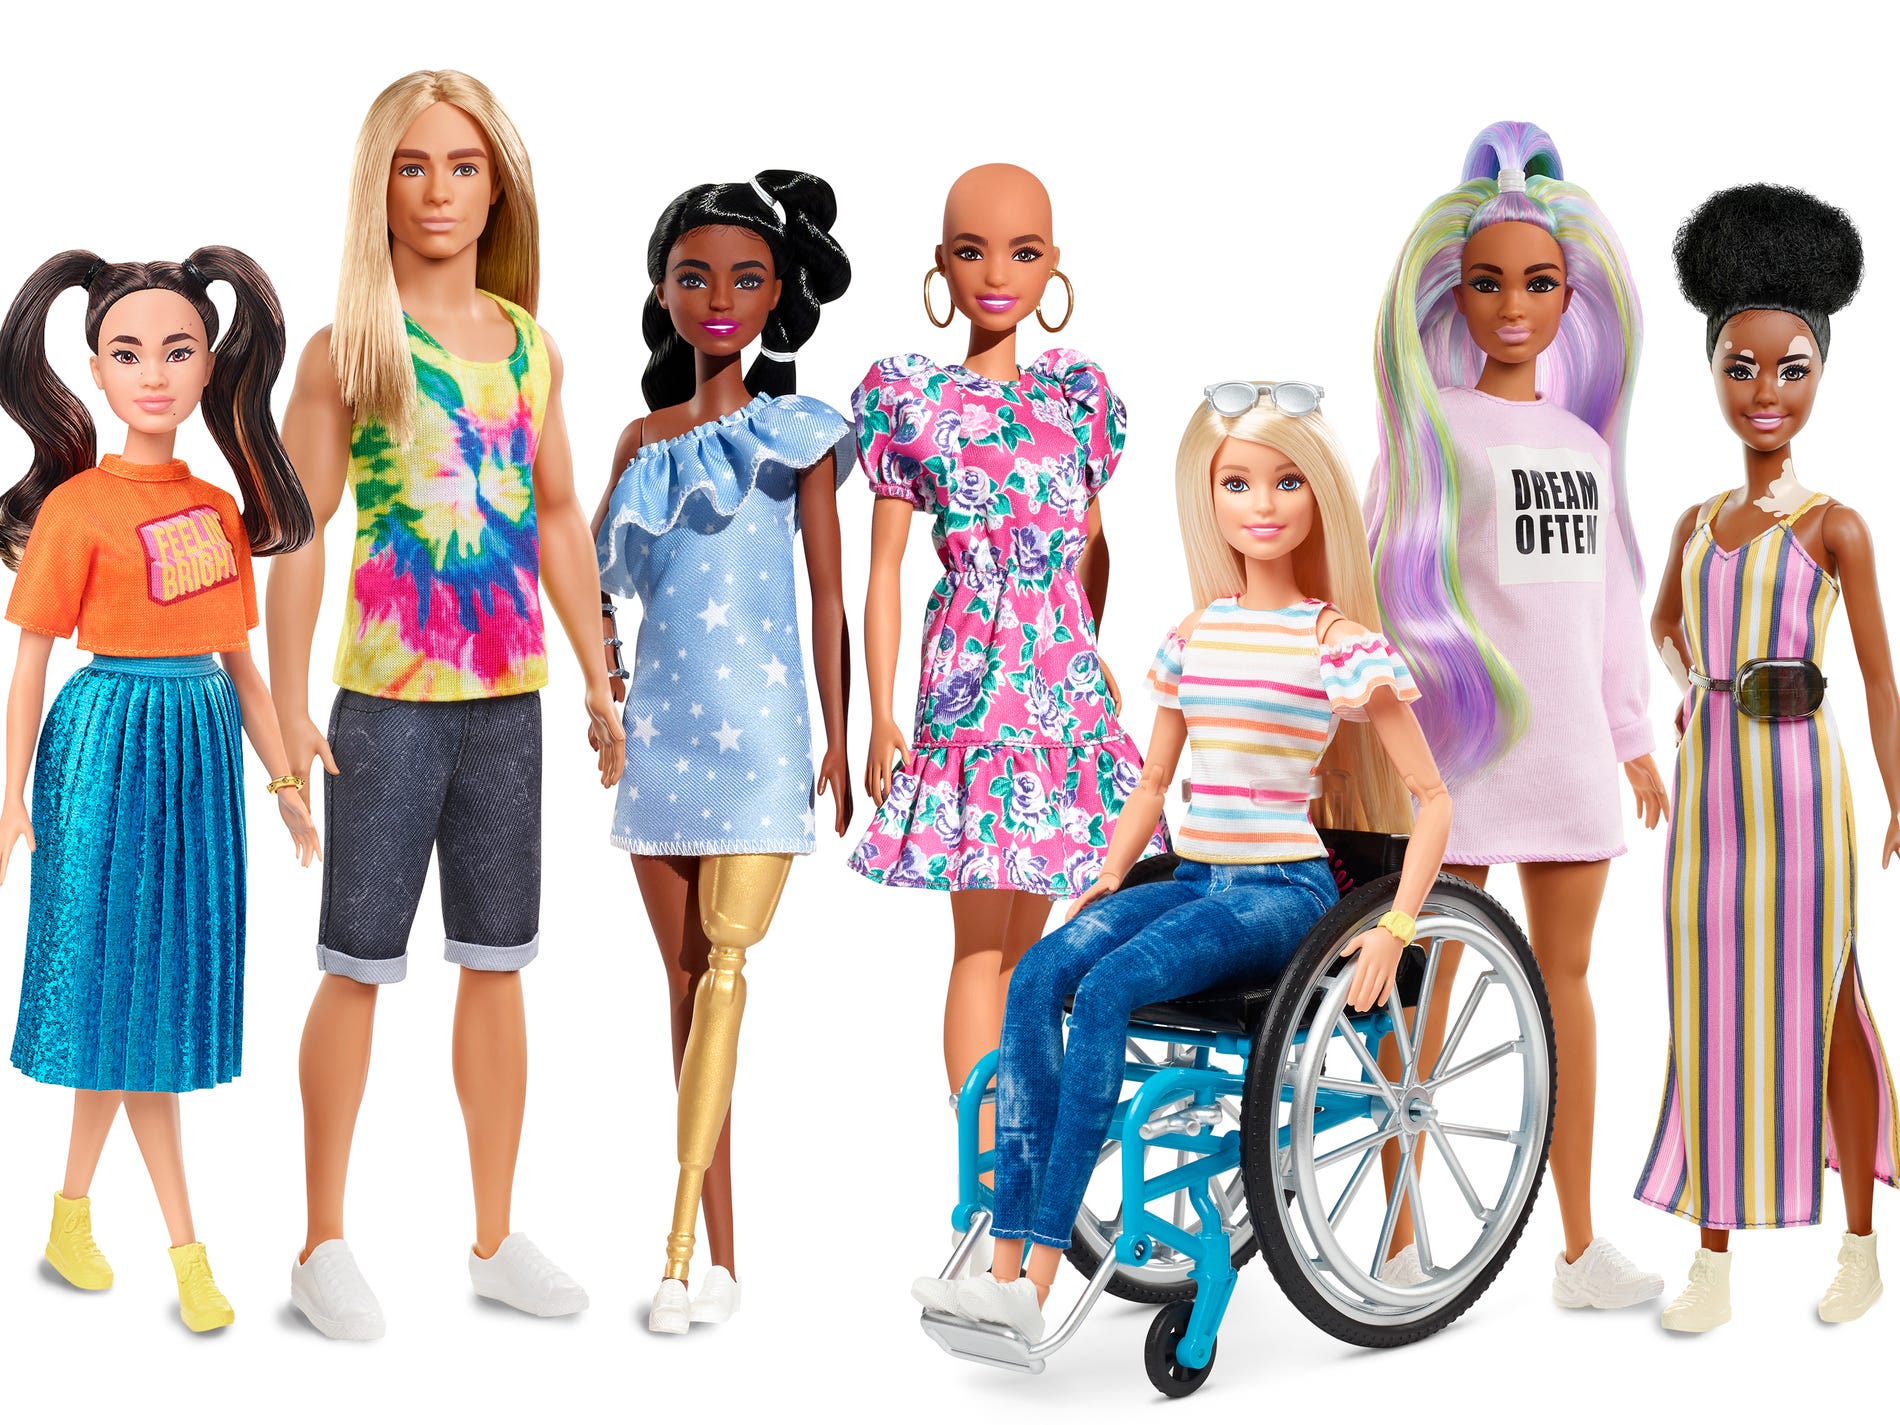 Why Girls Are Rejecting the New “Curvy” Barbie